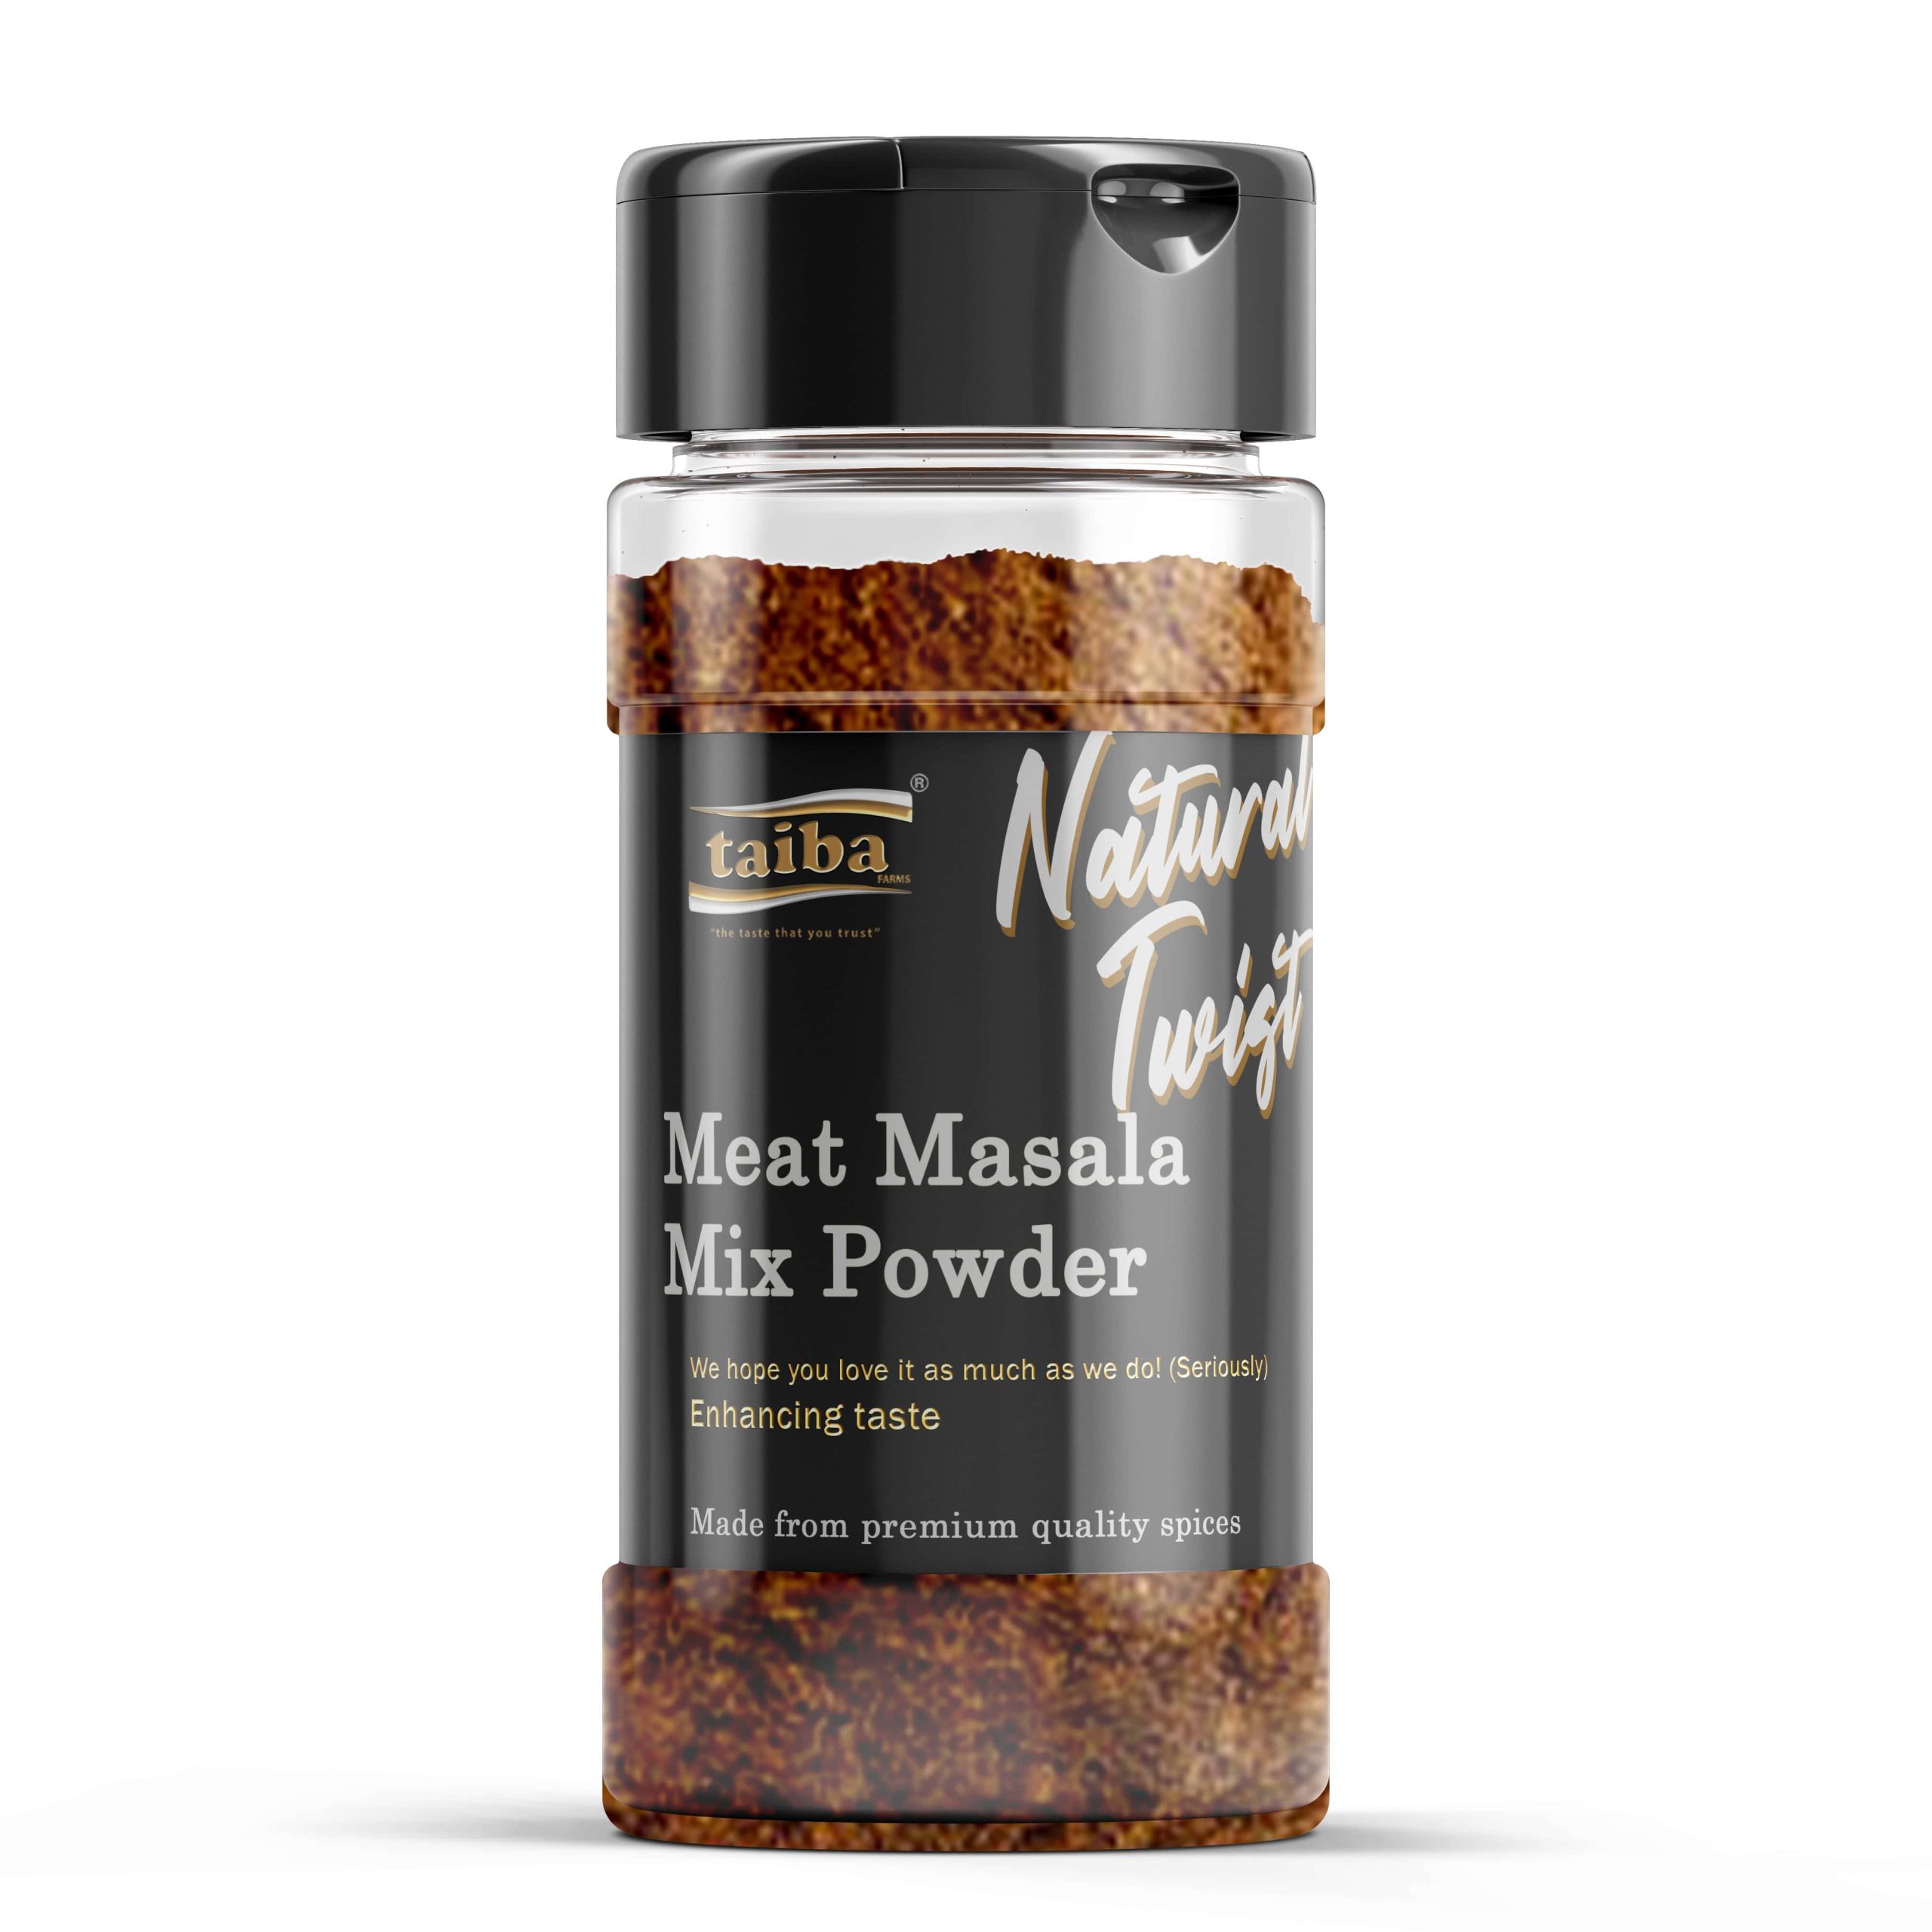 Meat-Masala-mix-shop-online-online-grocery-hearps-and-spices-wholesale-suppliers-distriputors-in-UAE-UK-USA